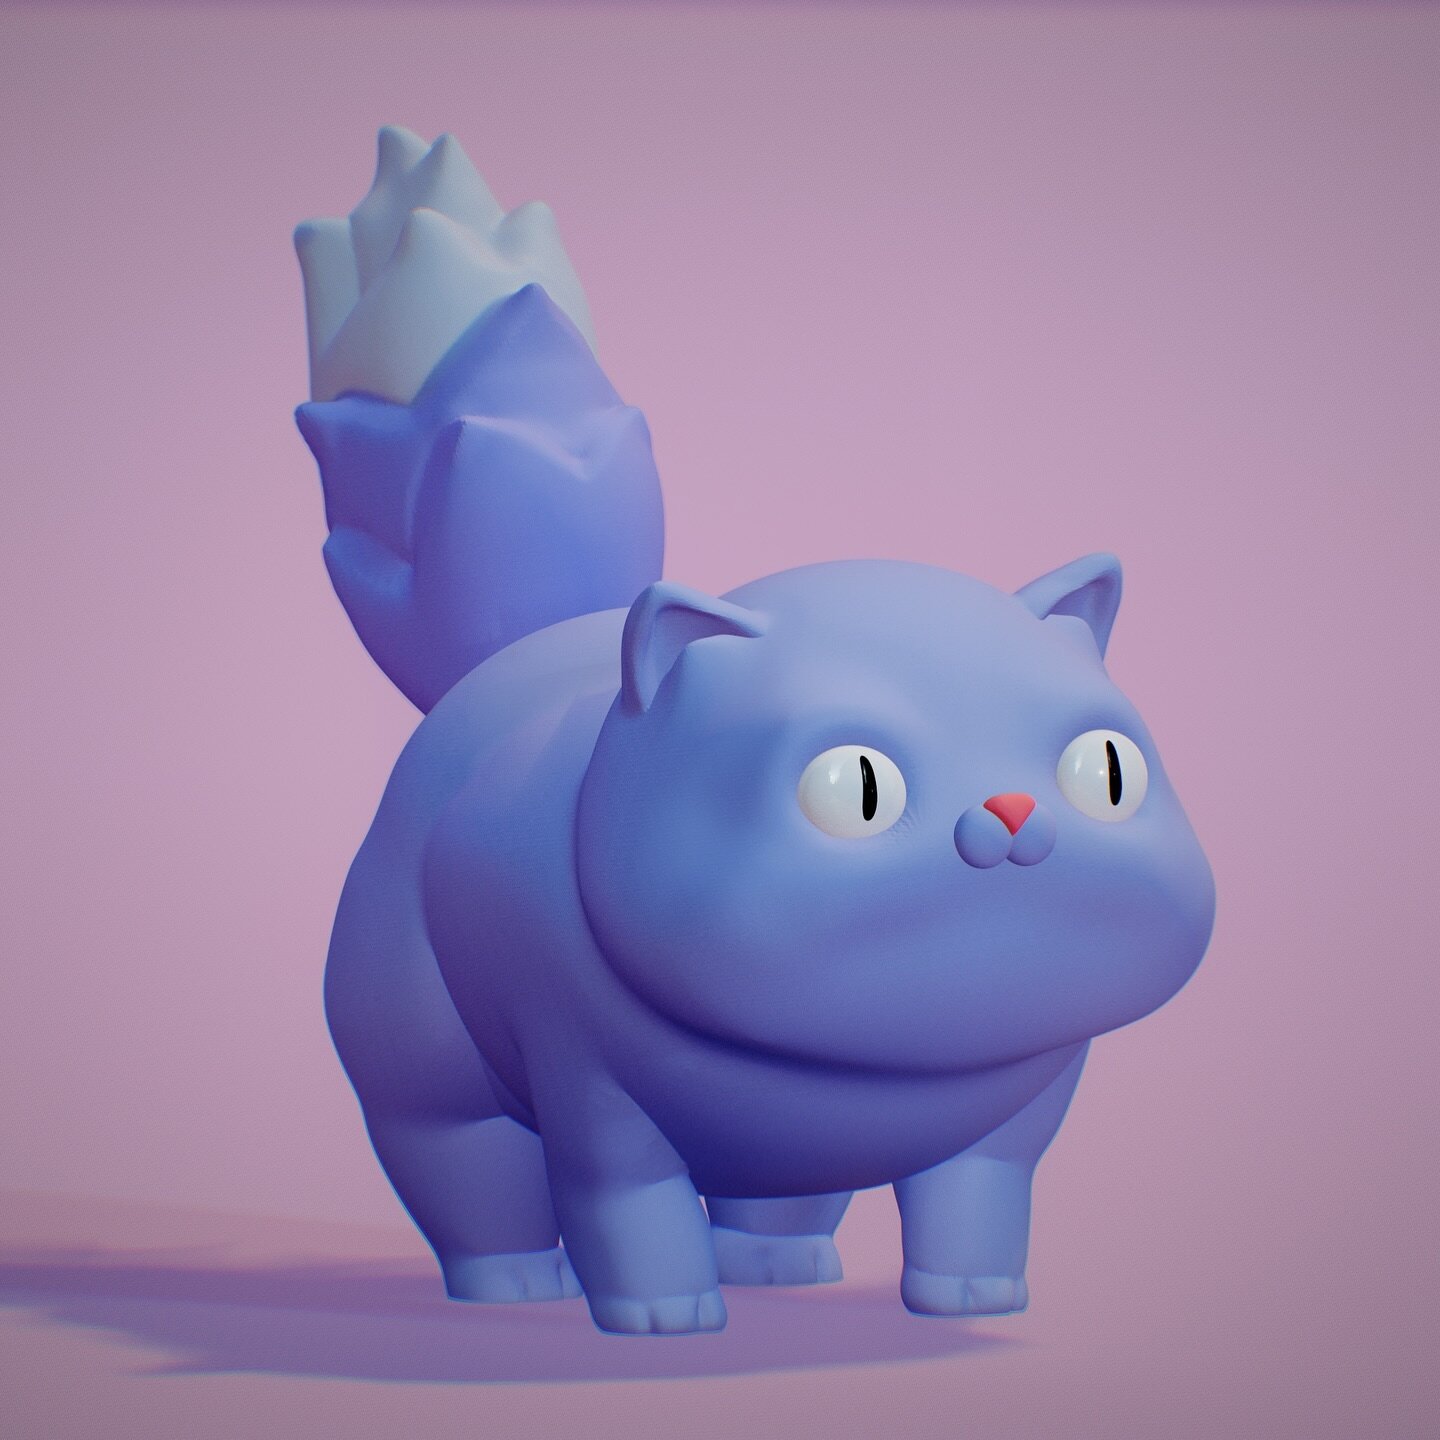 I present to you, a baby. 

#cat #3dmodeling